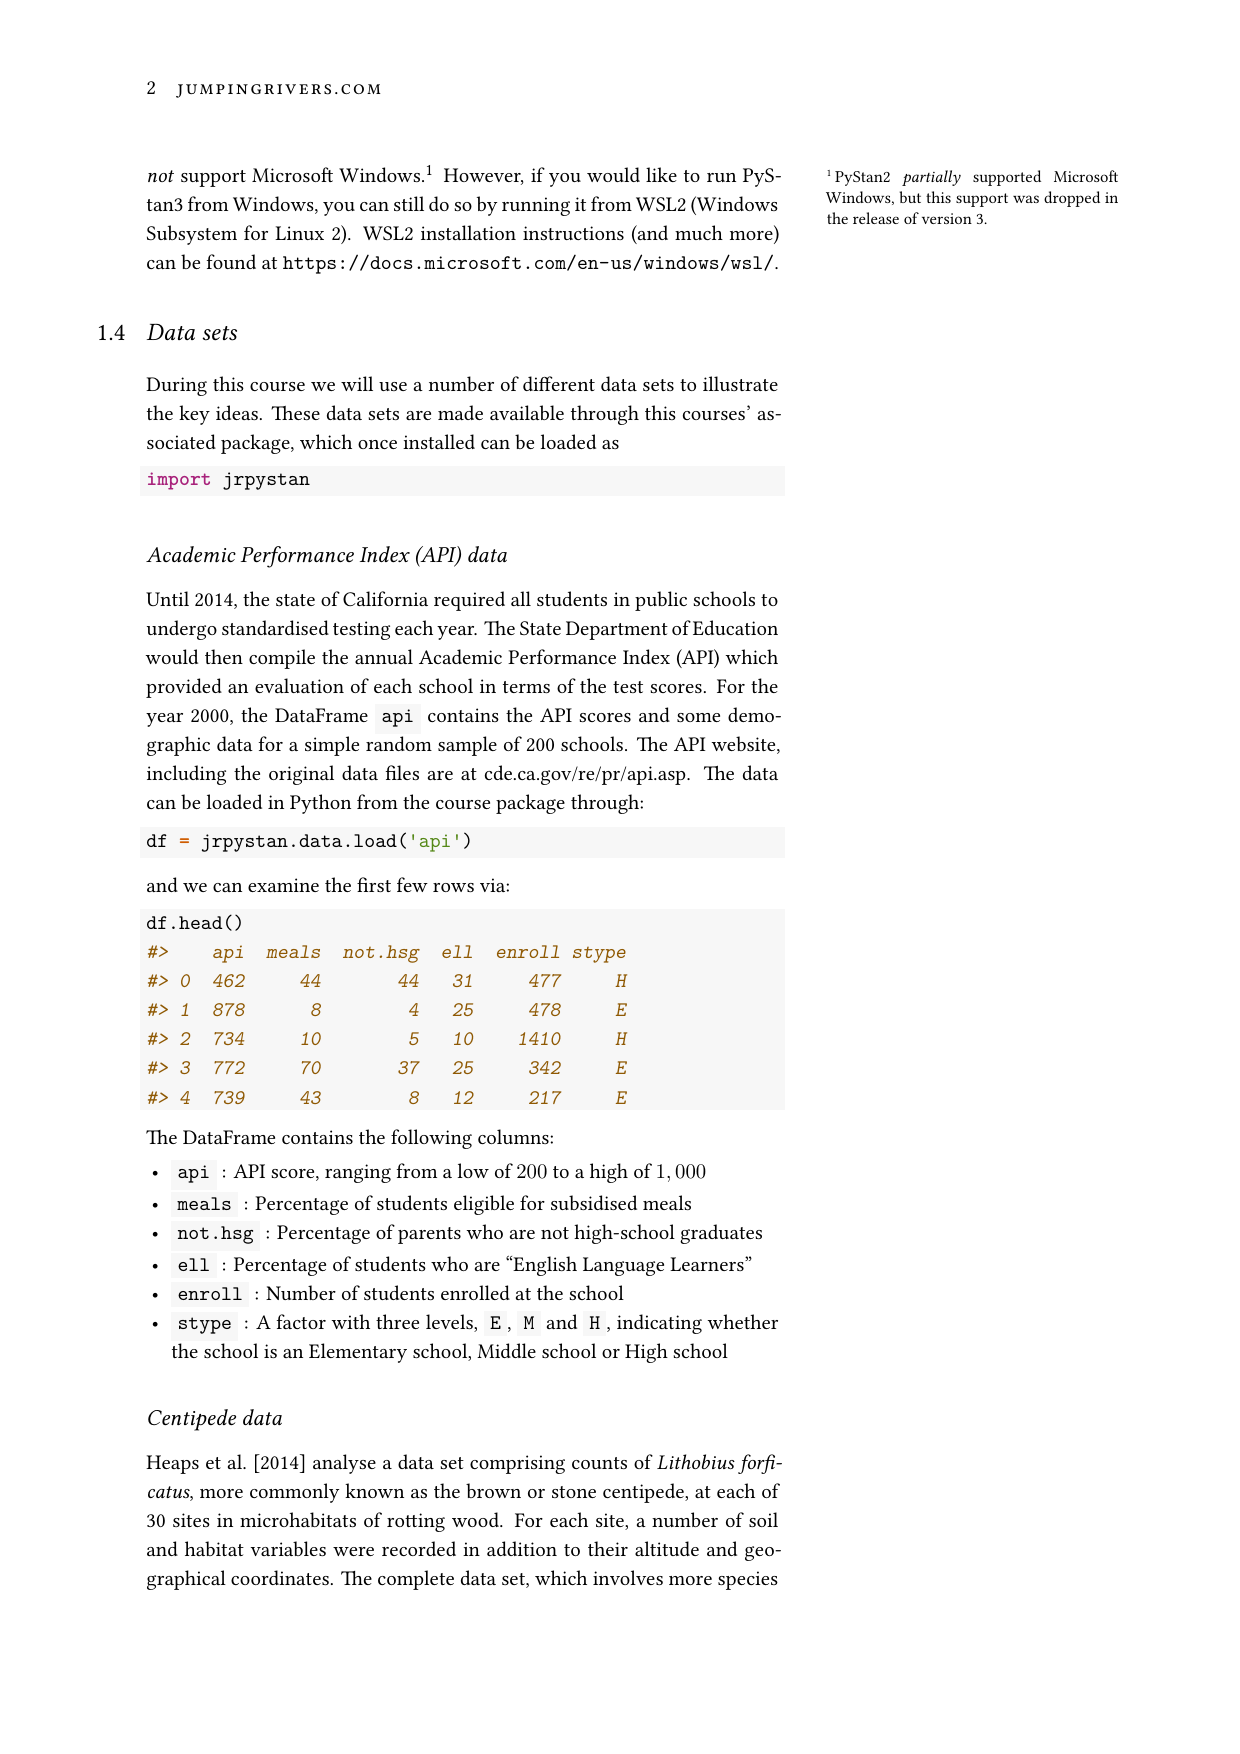 Page 3 of example course material for  Introduction to Bayesian Inference using PyStan